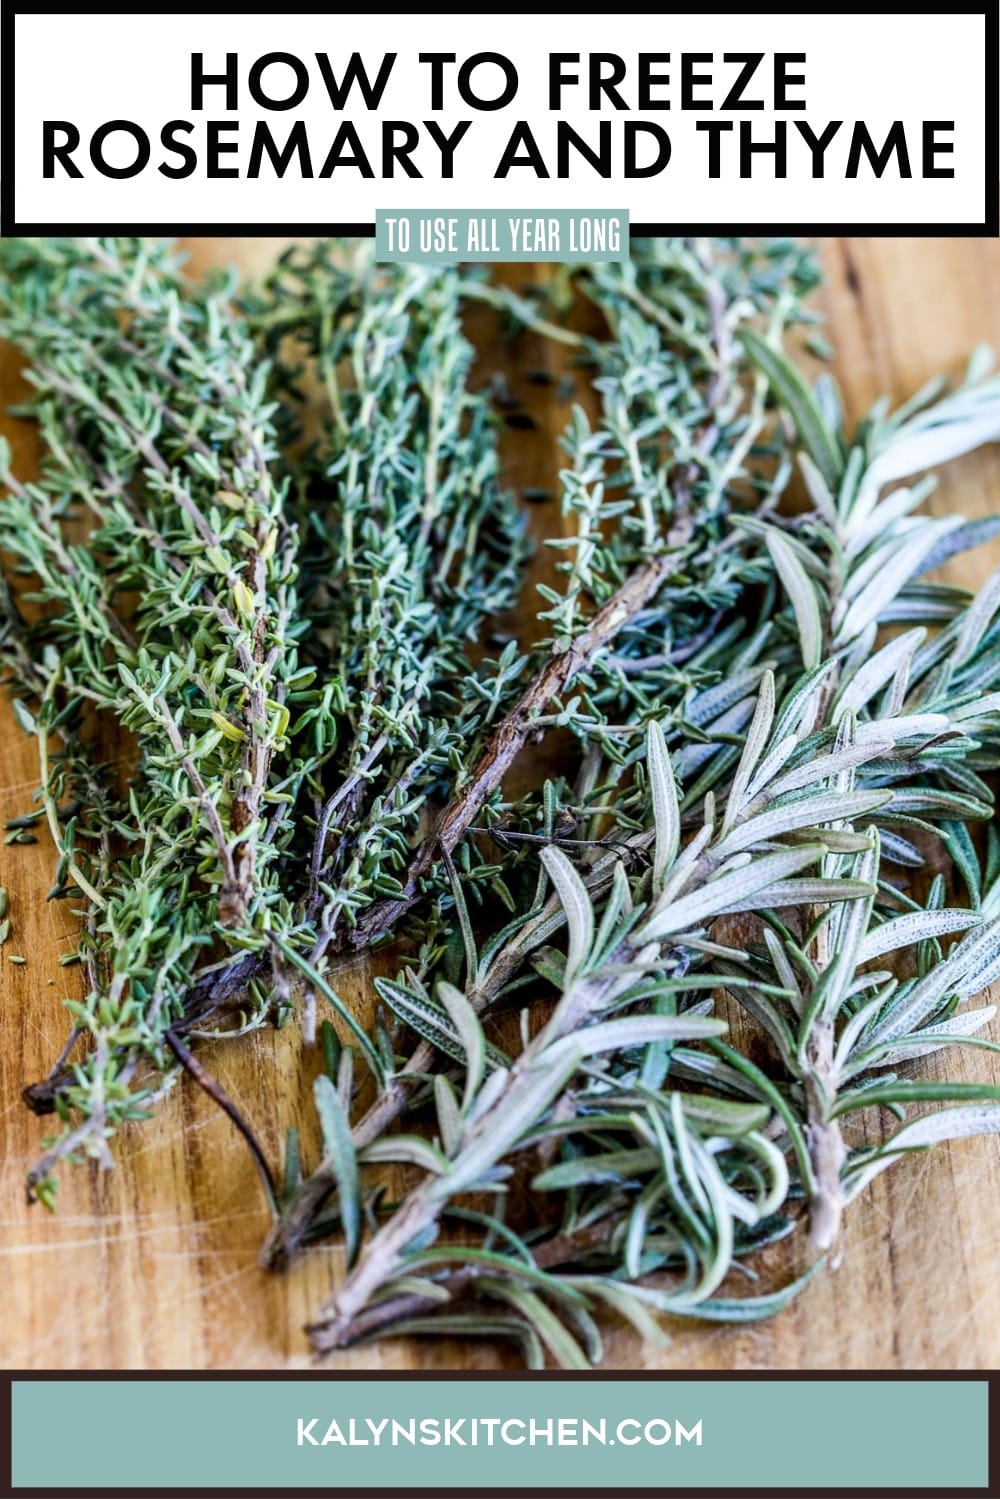 Pinterest image of How to Freeze Rosemary and Thyme